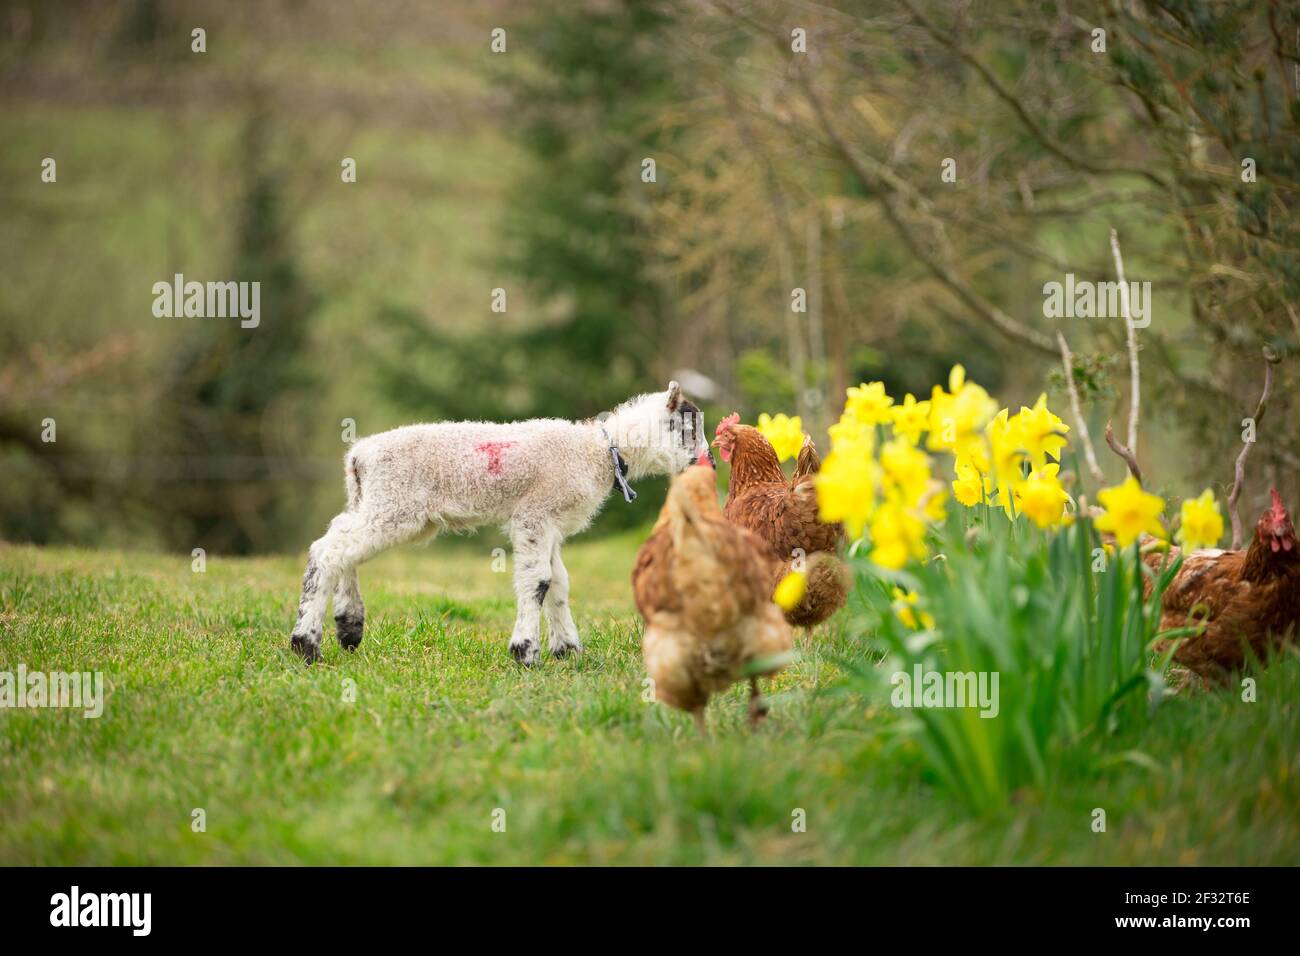 white lamb on its own in green grass field Stock Photo